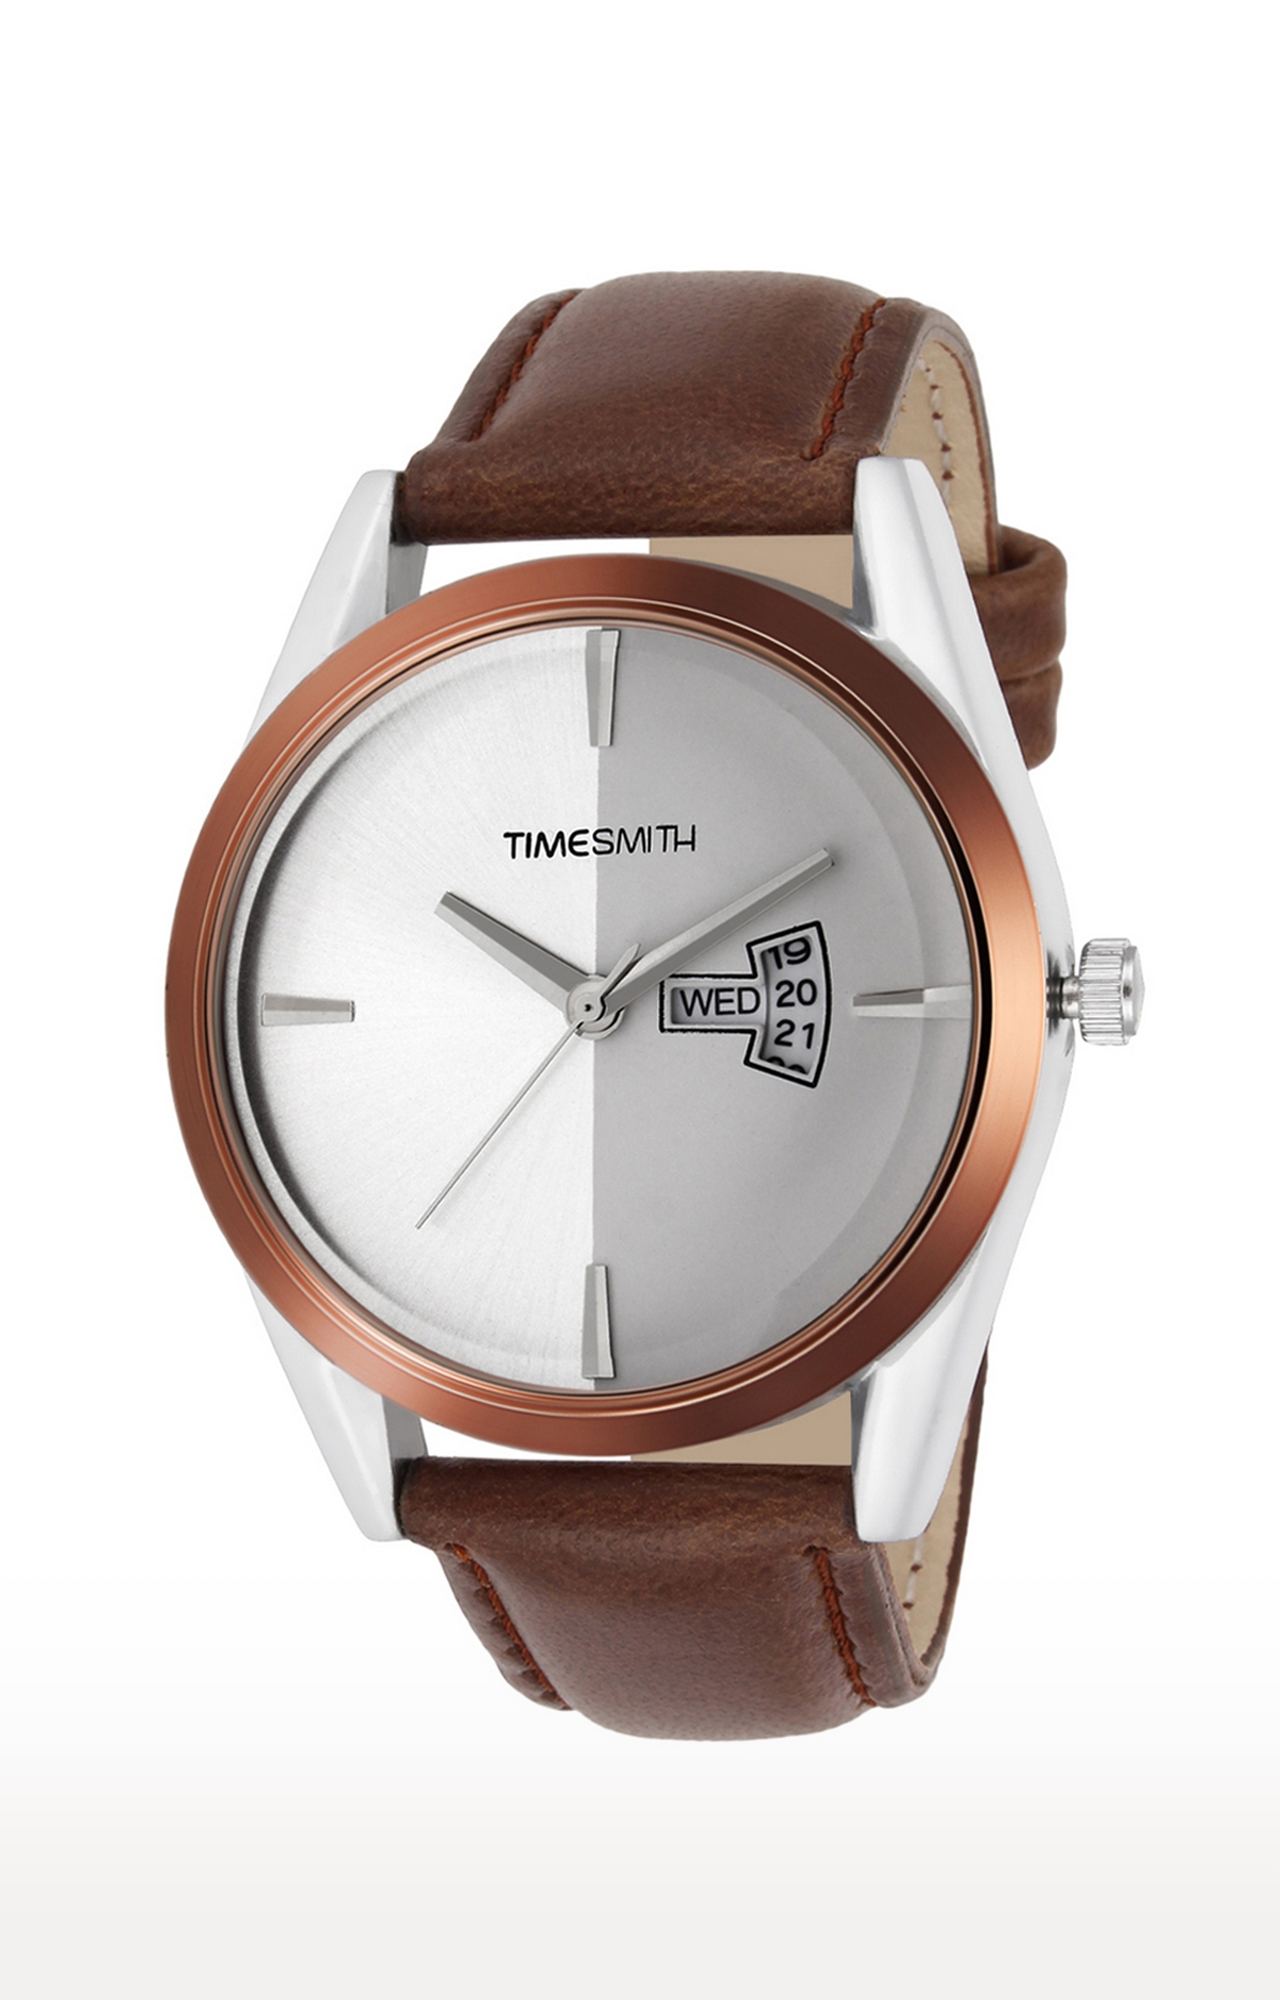 Timesmith | Timesmith White Dial Brown Leather Strap Genuine Watch TSC-015mtn